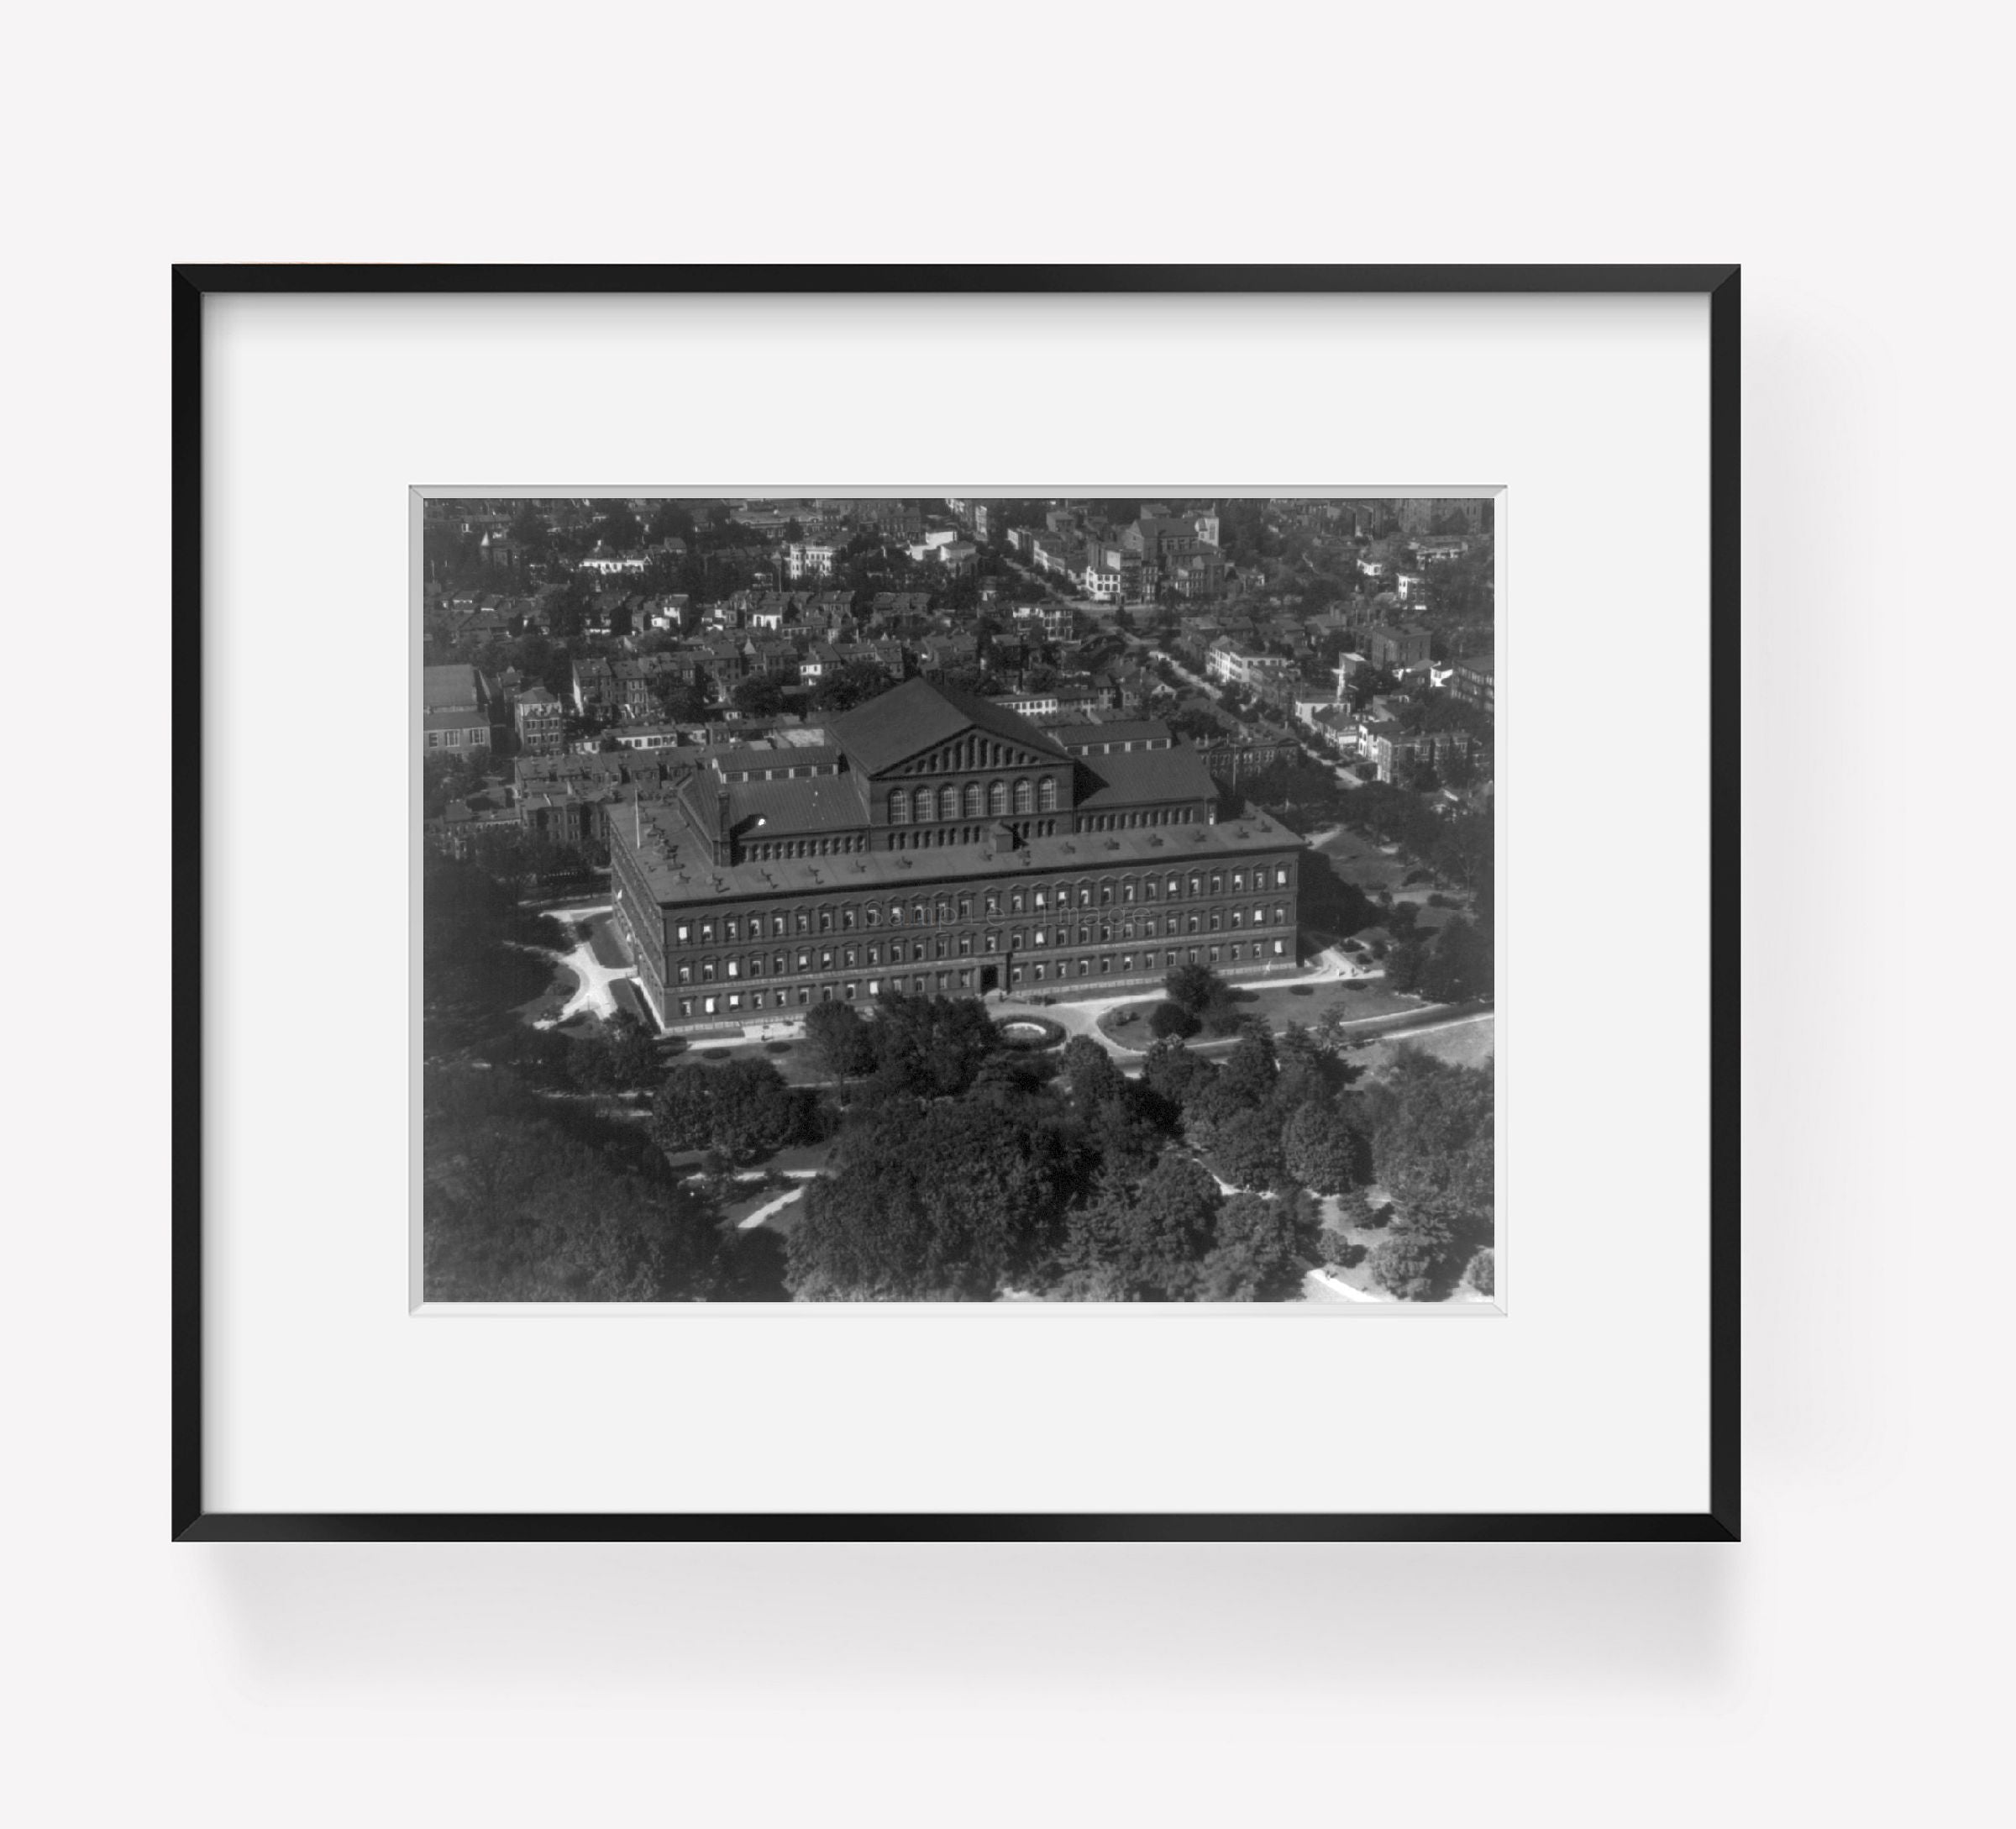 ca. 1920 photograph of Aerial views in Washington, D.C.: The Pension Office Buil